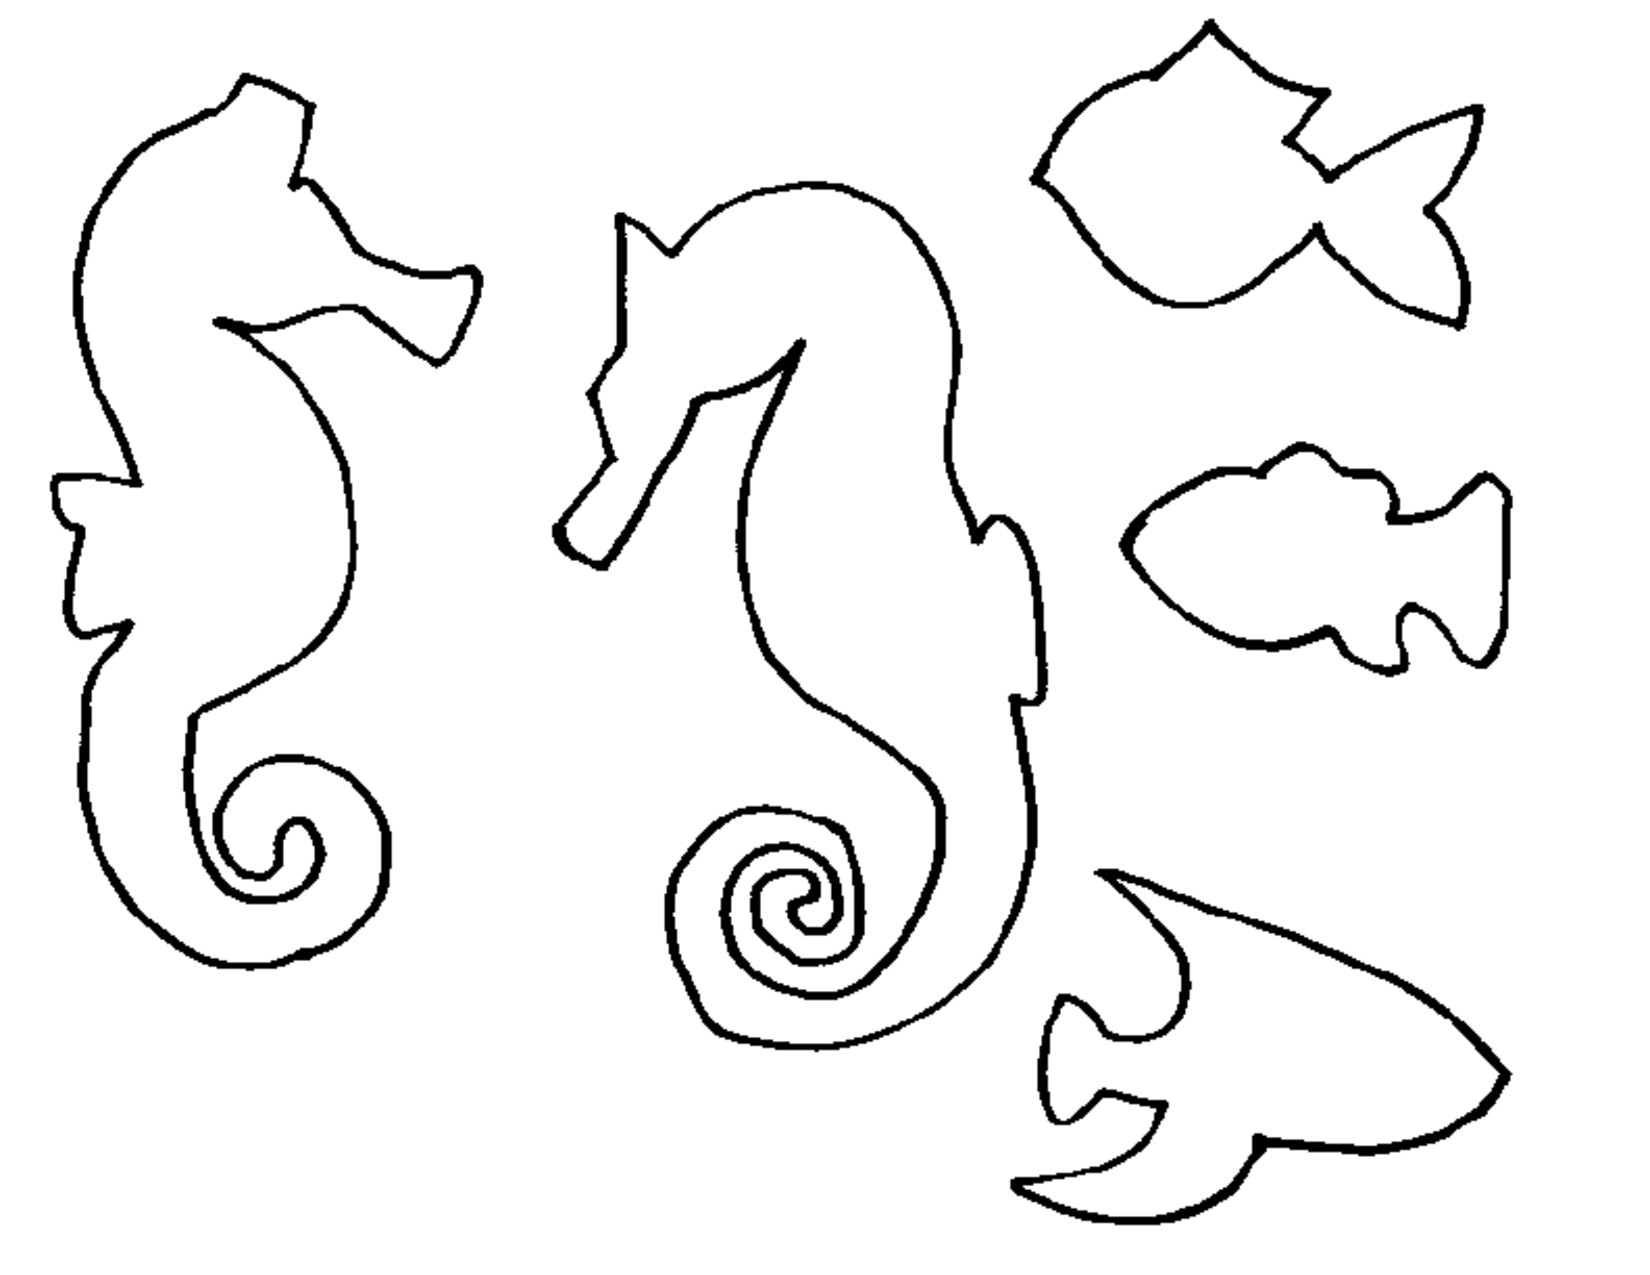 Best Photos of Template Seahorse Eric Carle - Mr. Seahorse ... - Fish Pattern coloring page